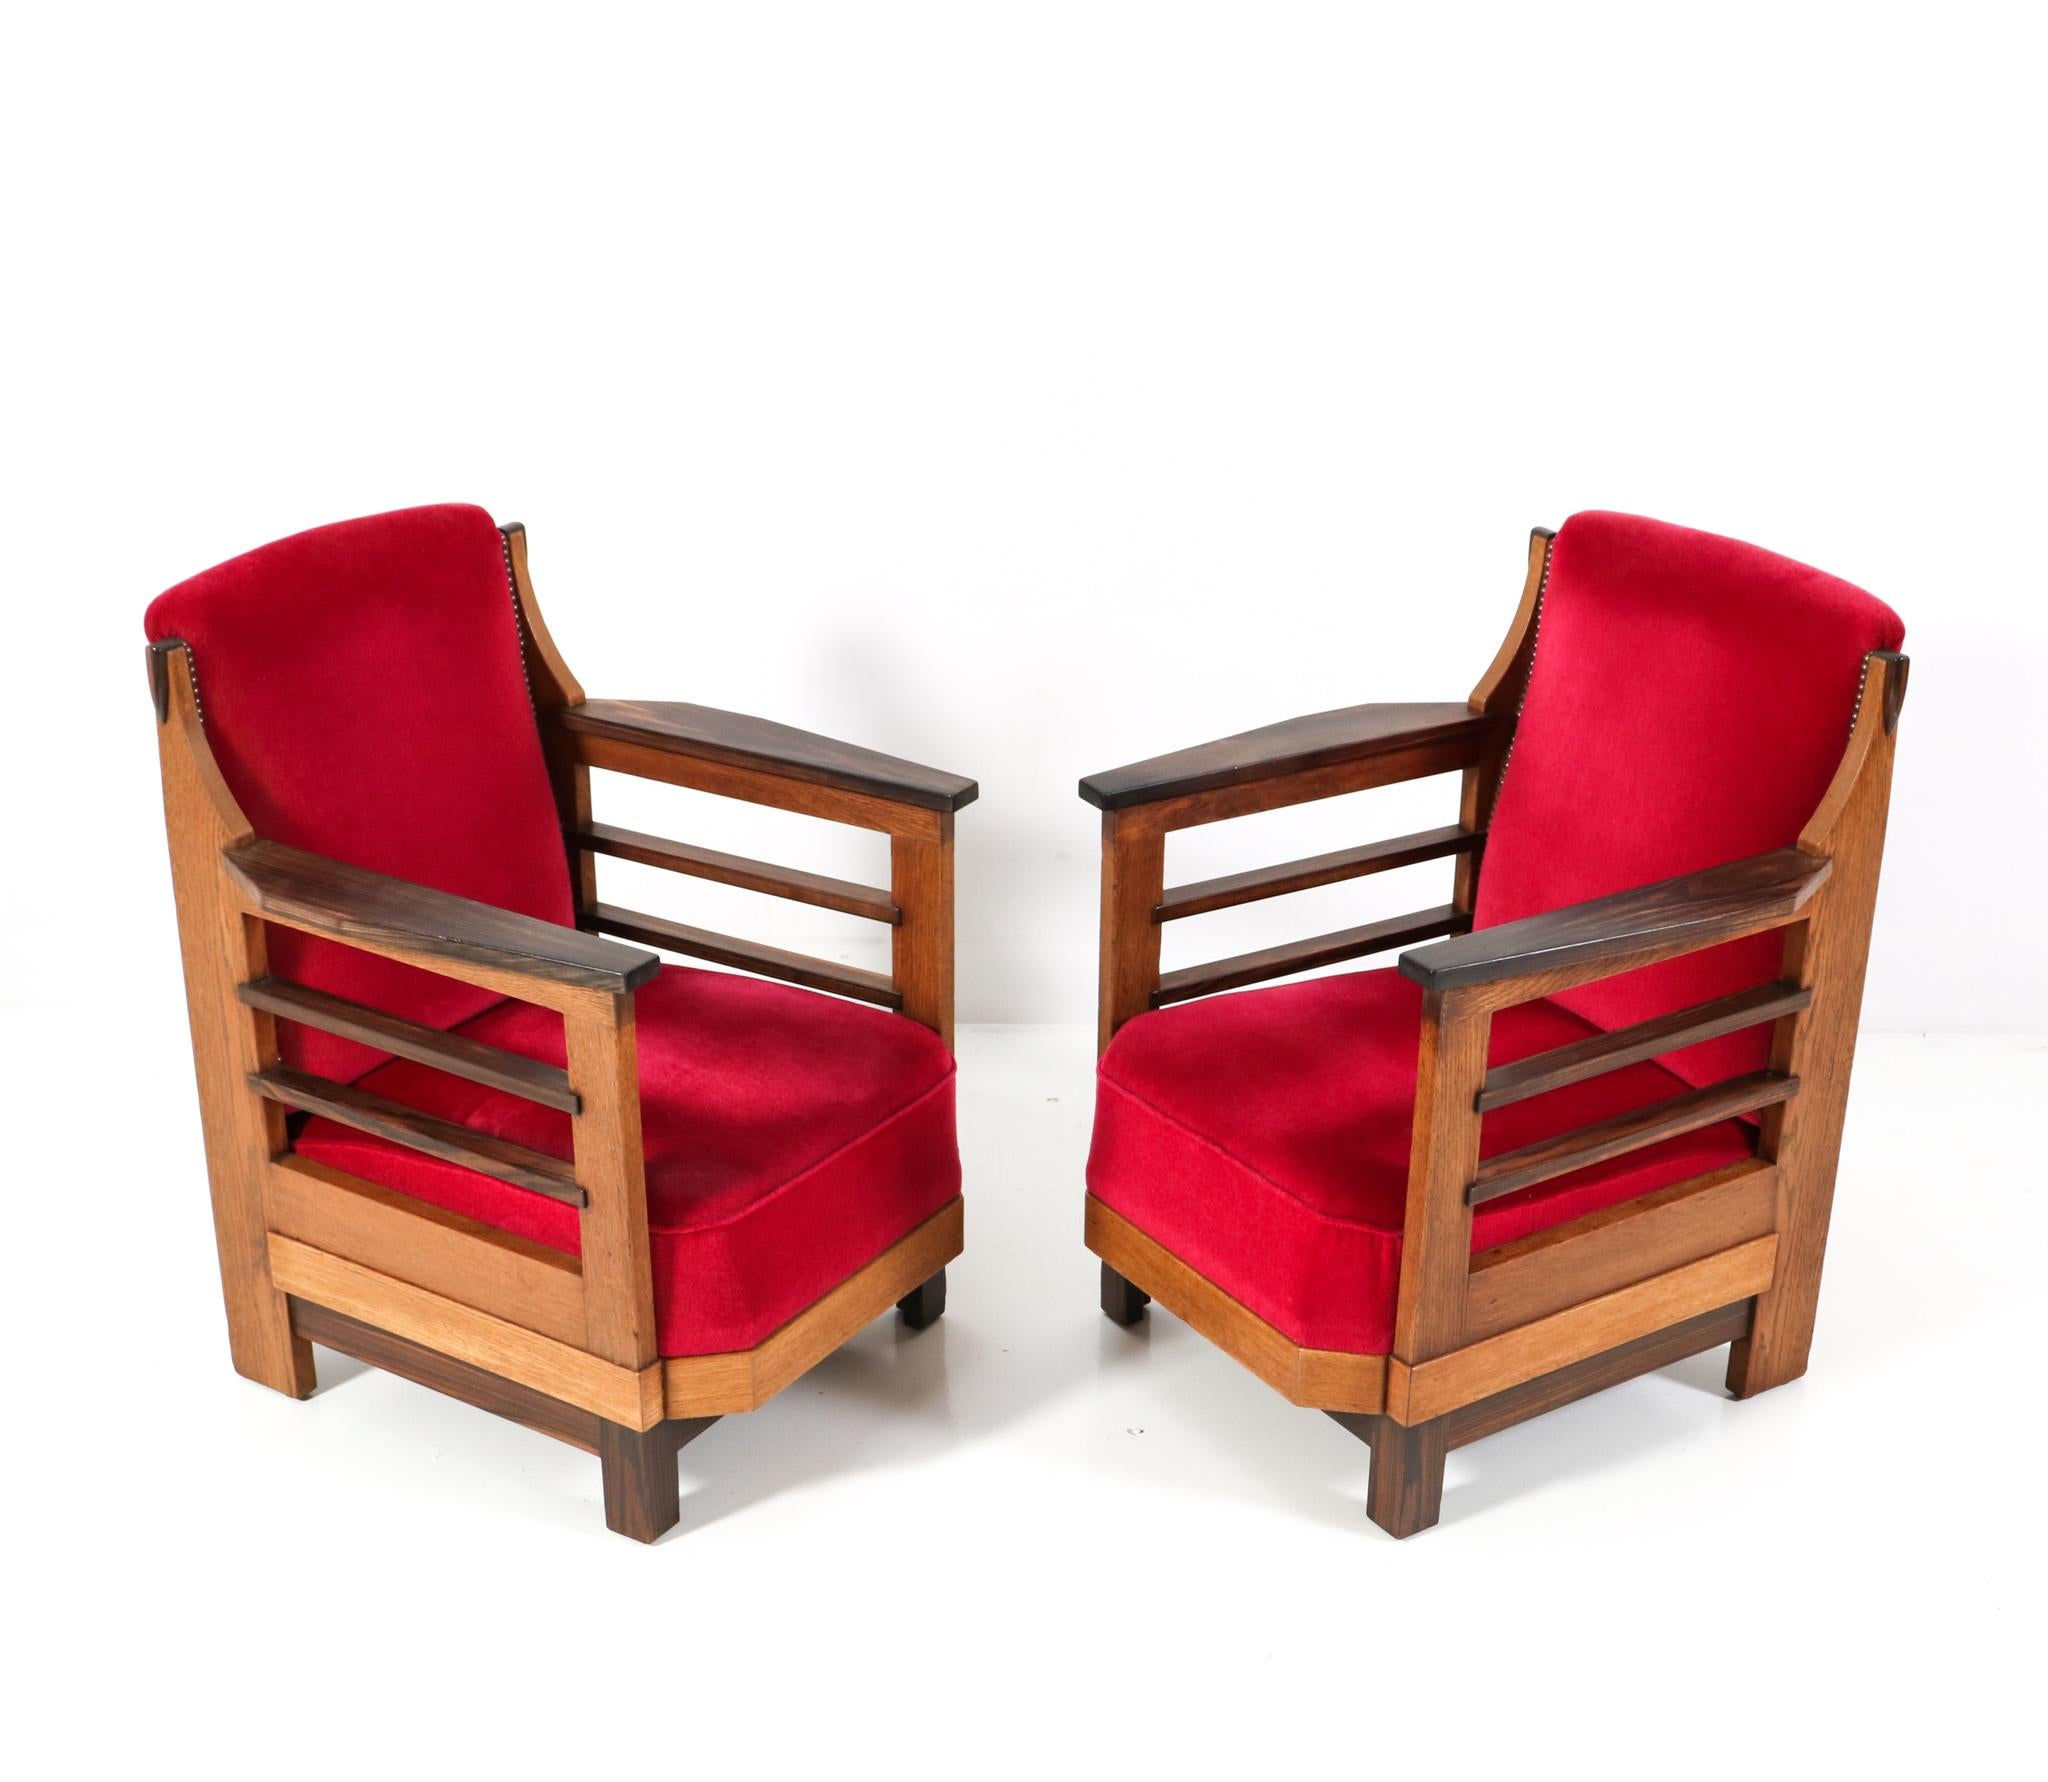 Magnificent and rare pair of Art Deco Amsterdamse School lounge chairs. Design by Anton Lucas for N.V. Meubelkunst Leiden. Striking Dutch design from the 1920s. Solid oak frames with solid ebony macassar armrests and details at both sides.